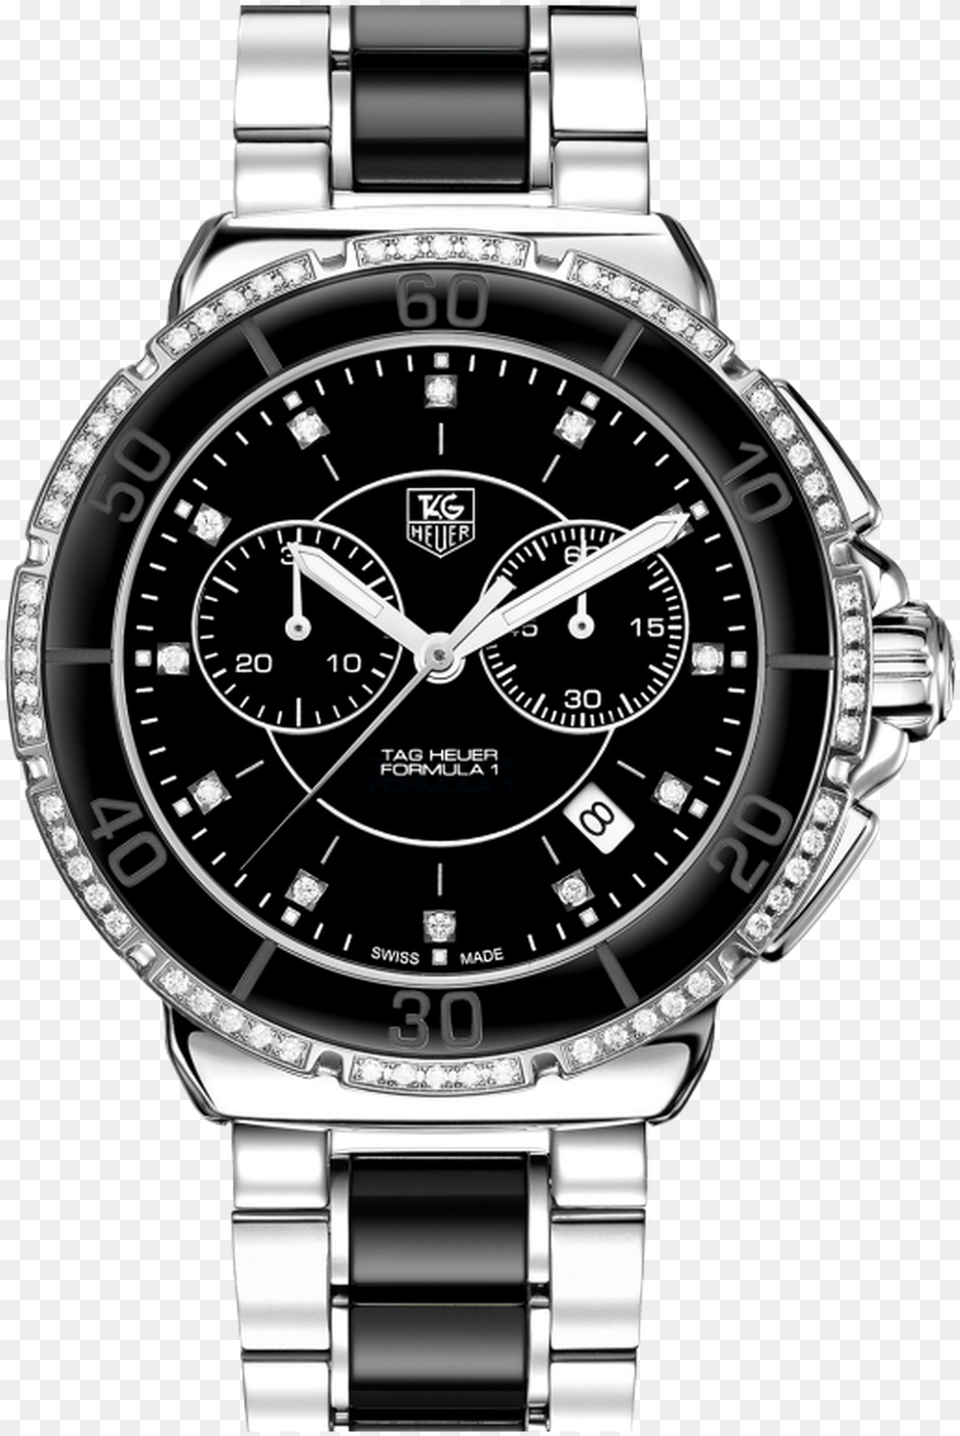 Watch Download Transparent Image Breitling Superocean Special, Arm, Body Part, Person, Wristwatch Png